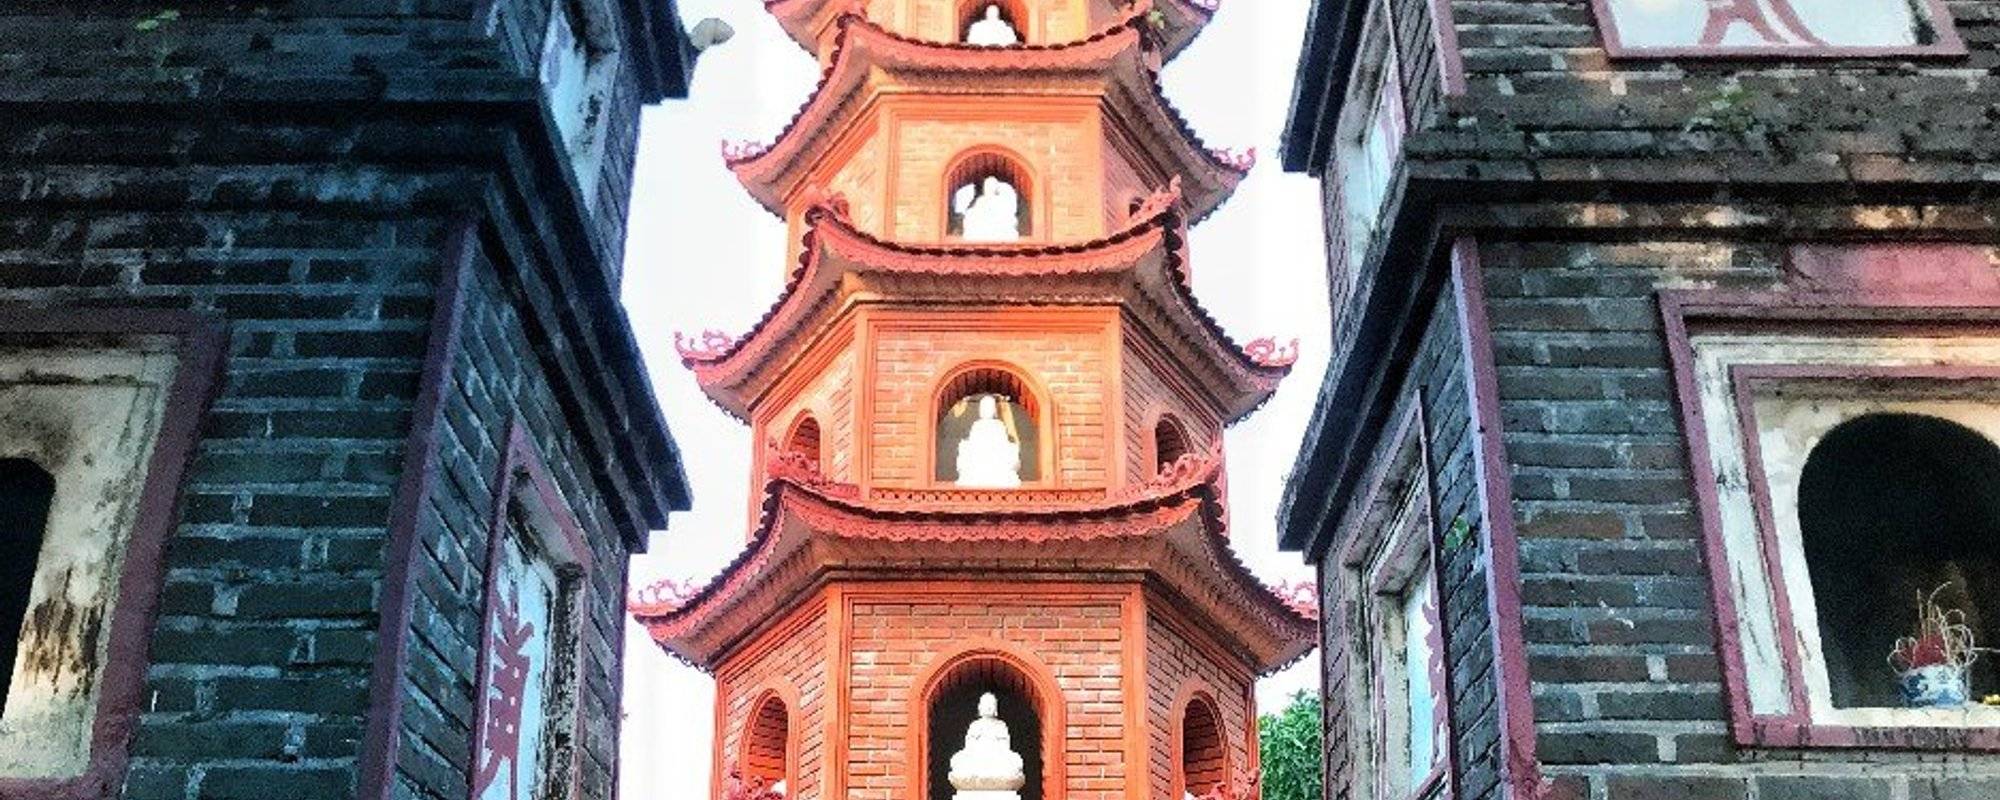 A Photography Tip I Learned At Tran Quoc Pagoda in Hanoi 